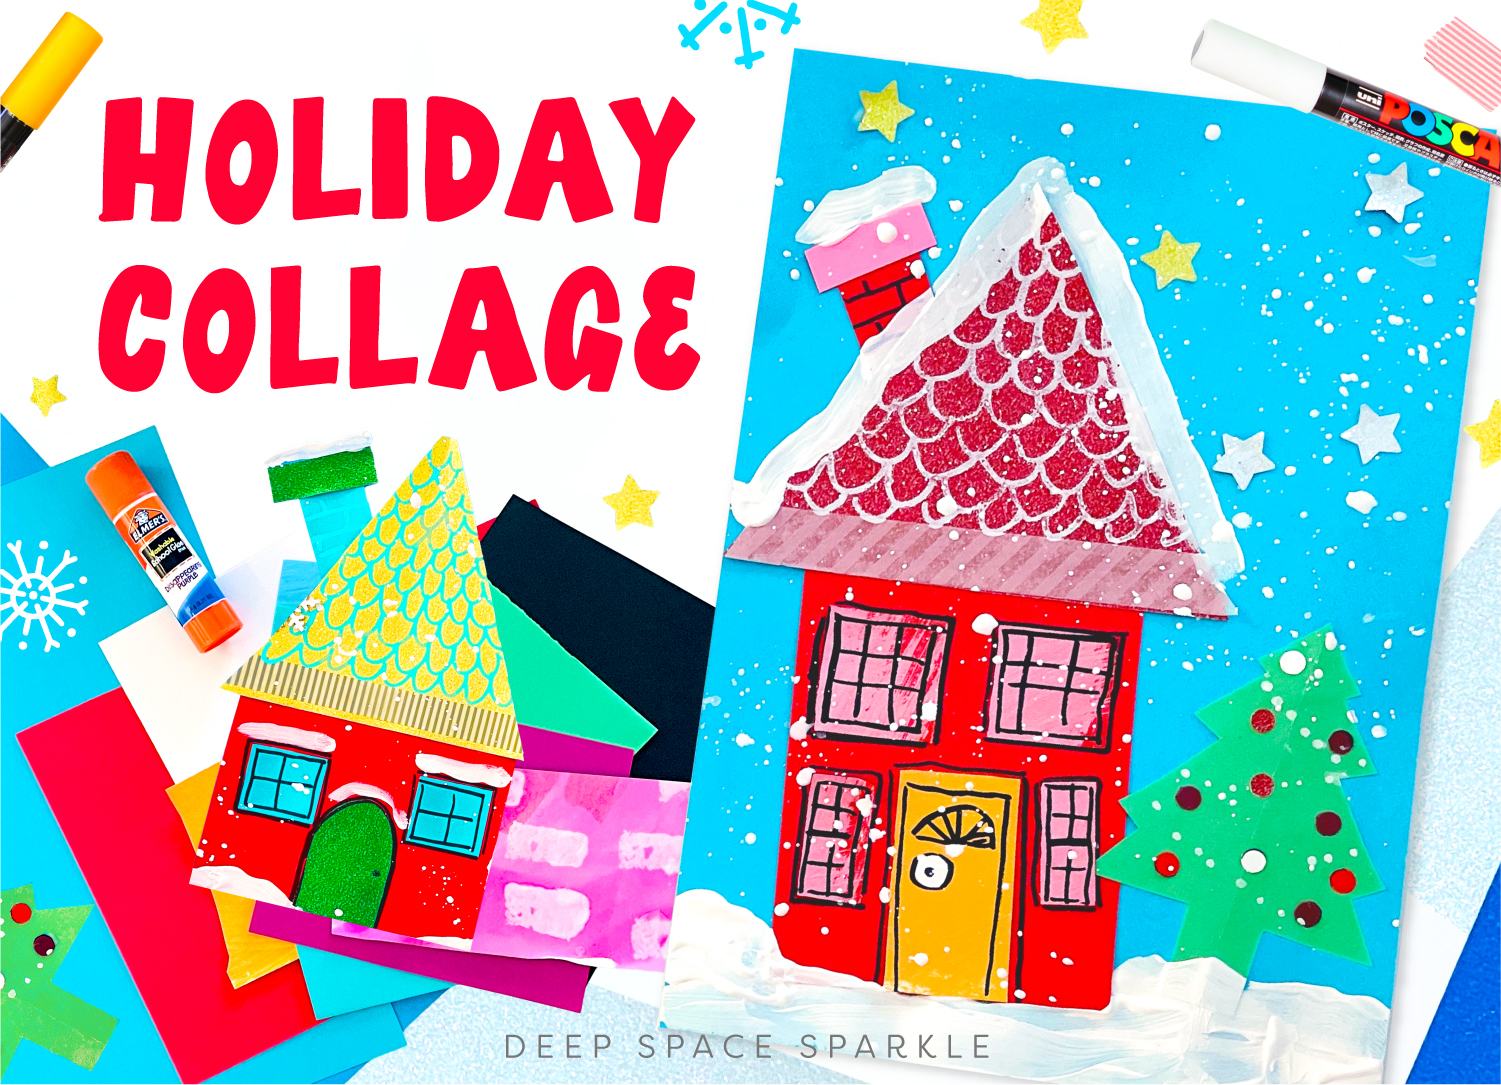 Holiday Collage Project for kids | Deep Space Sparkle